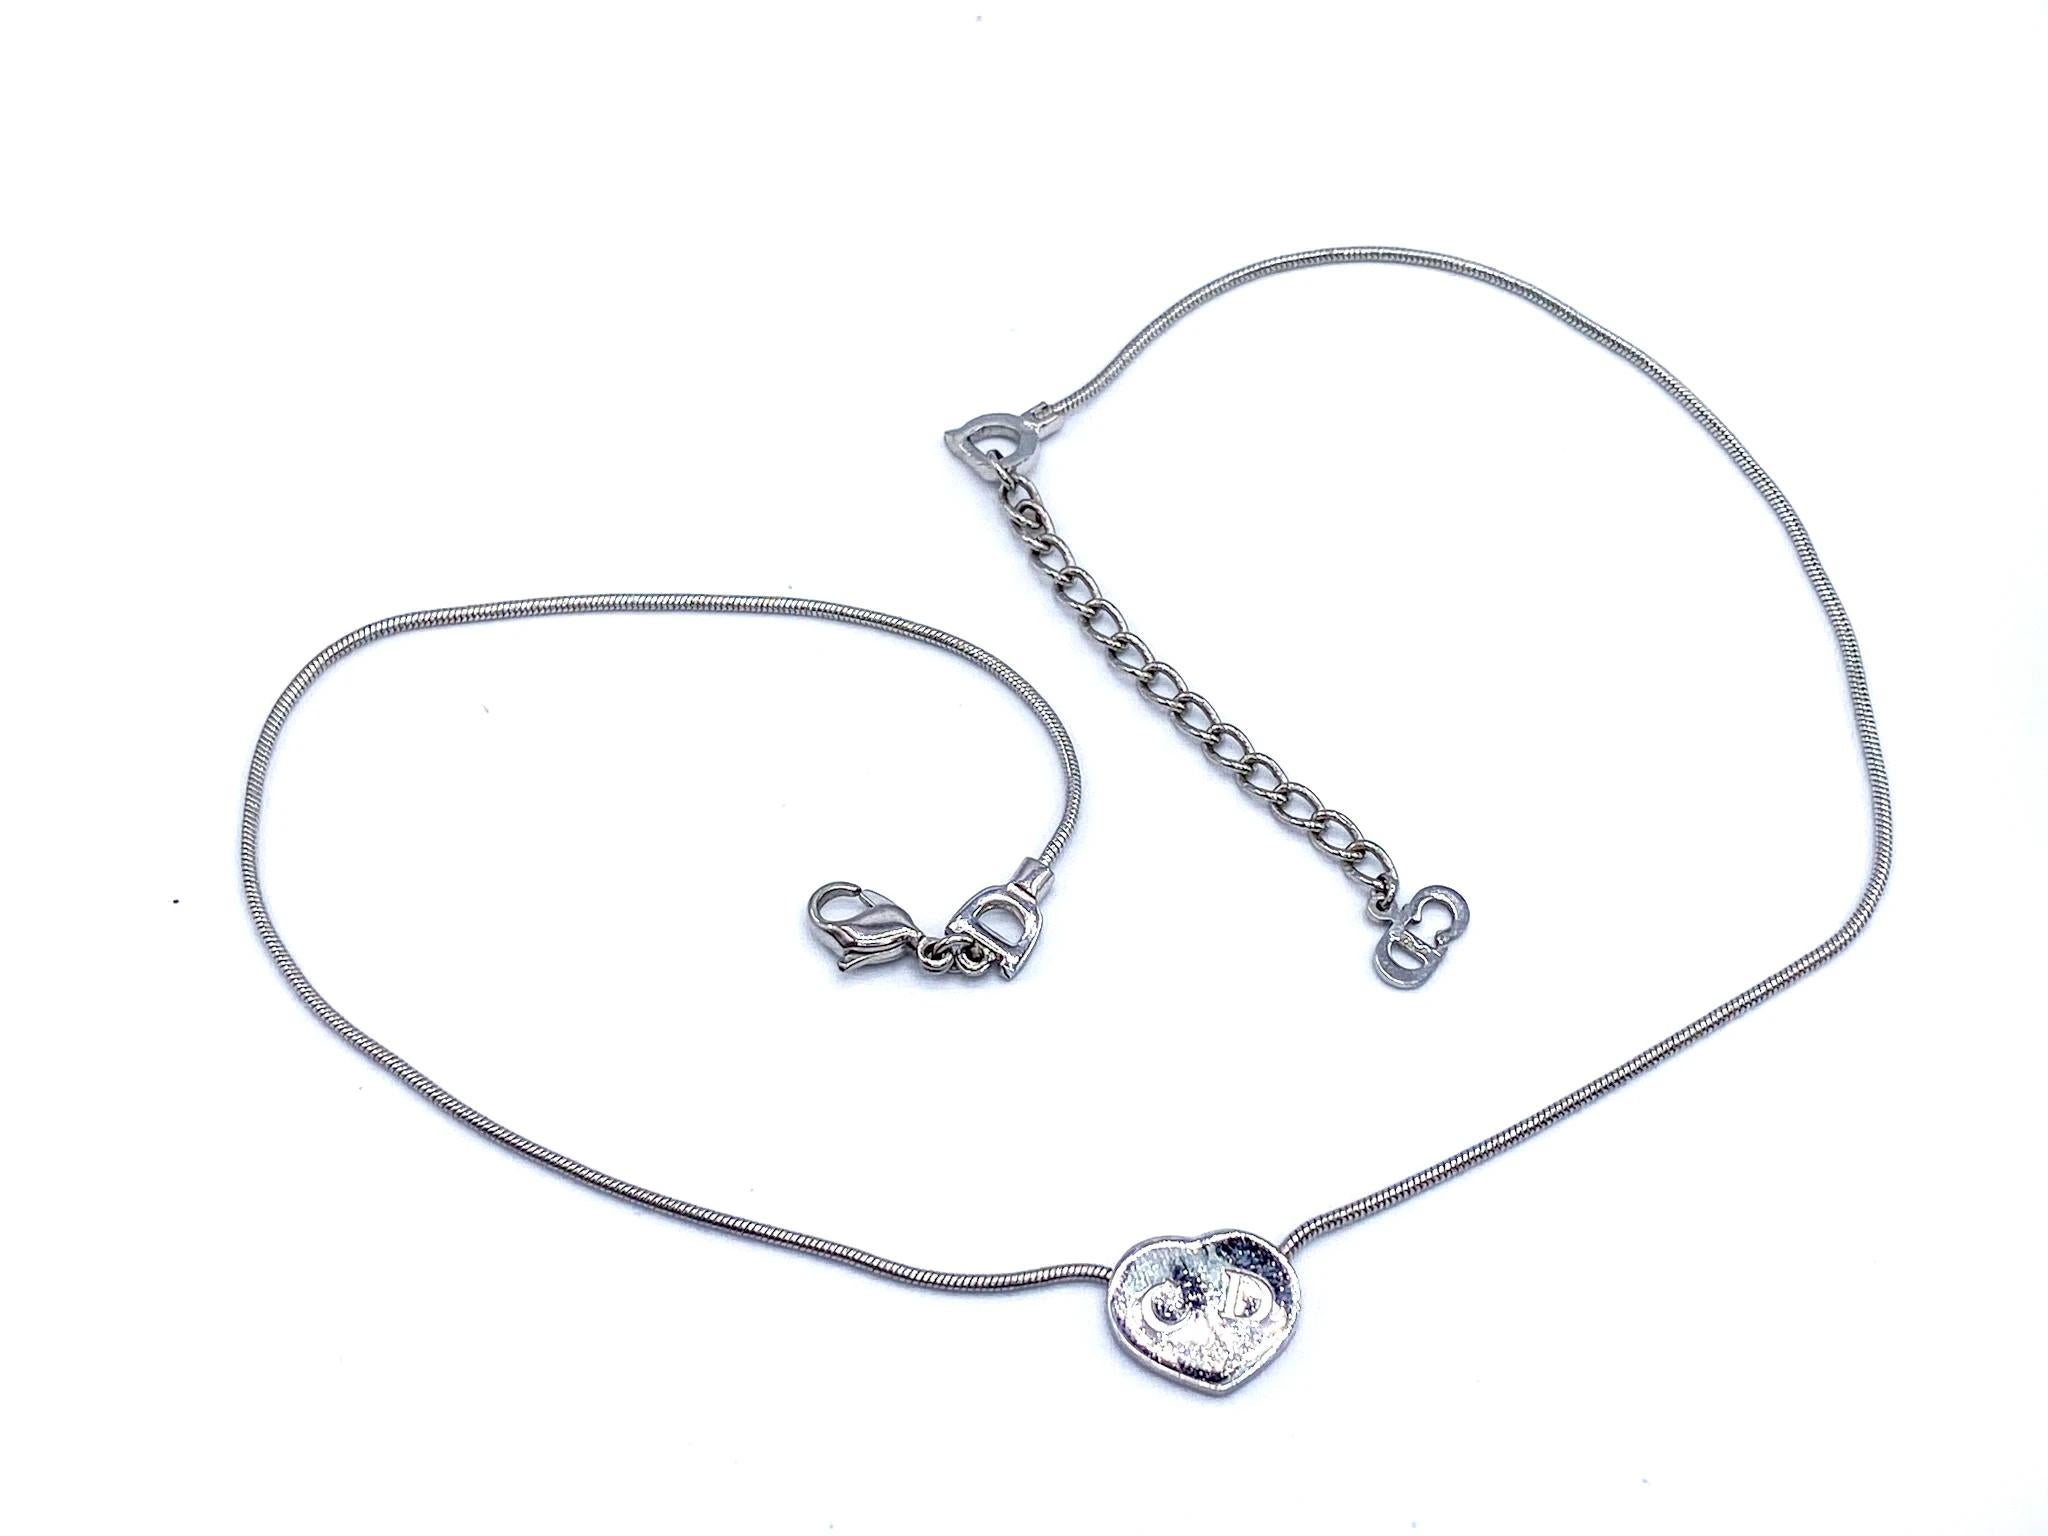 Dior Vintage Heart Necklace

A delicate timeless piece from the early 2000s Dior archive. 

Detail
-Cast from silver plated metal
-Delicate chain
-Small heart shaped pendant engraved with the initials of Christian Dior
-Lobster clasp
-Extender